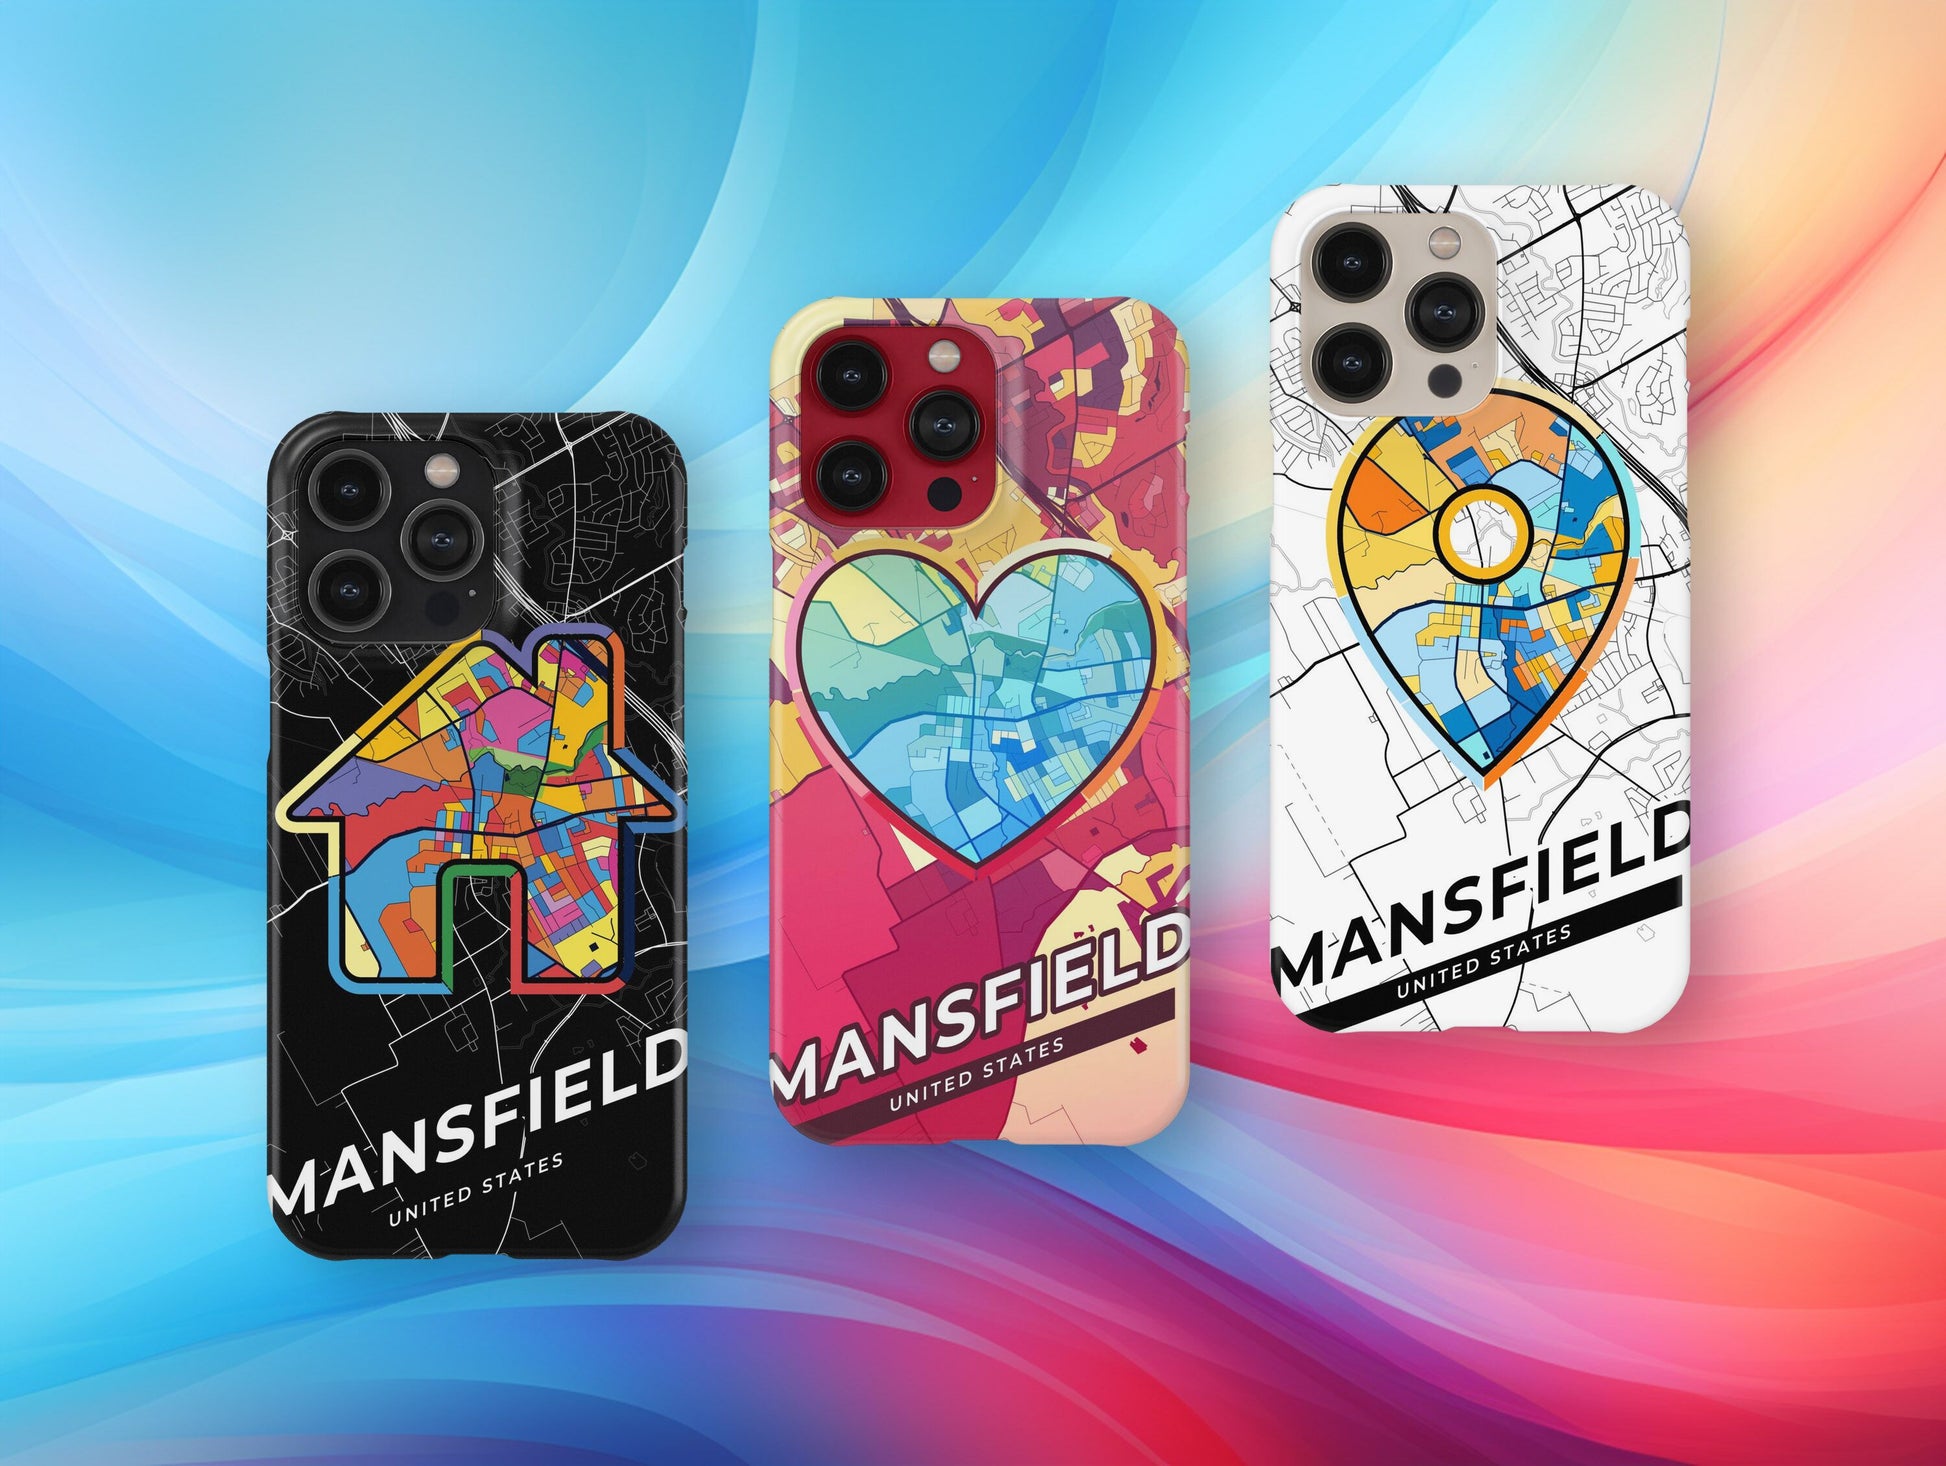 Mansfield Texas slim phone case with colorful icon. Birthday, wedding or housewarming gift. Couple match cases.